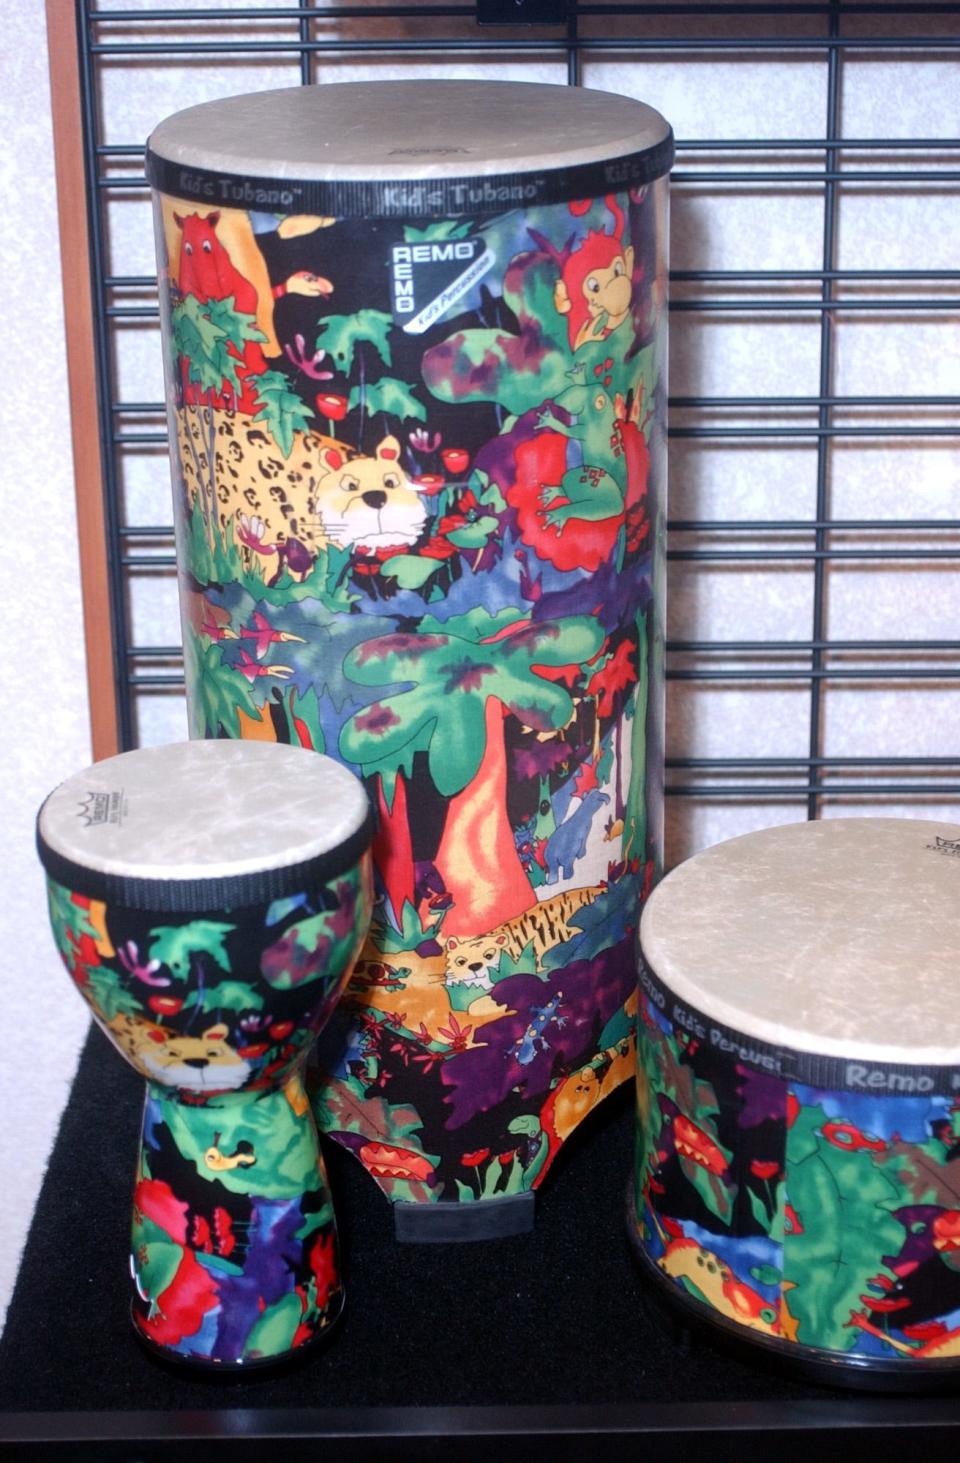 Remo sells a full line of drums and accessories that helped launch the company several decades ago.